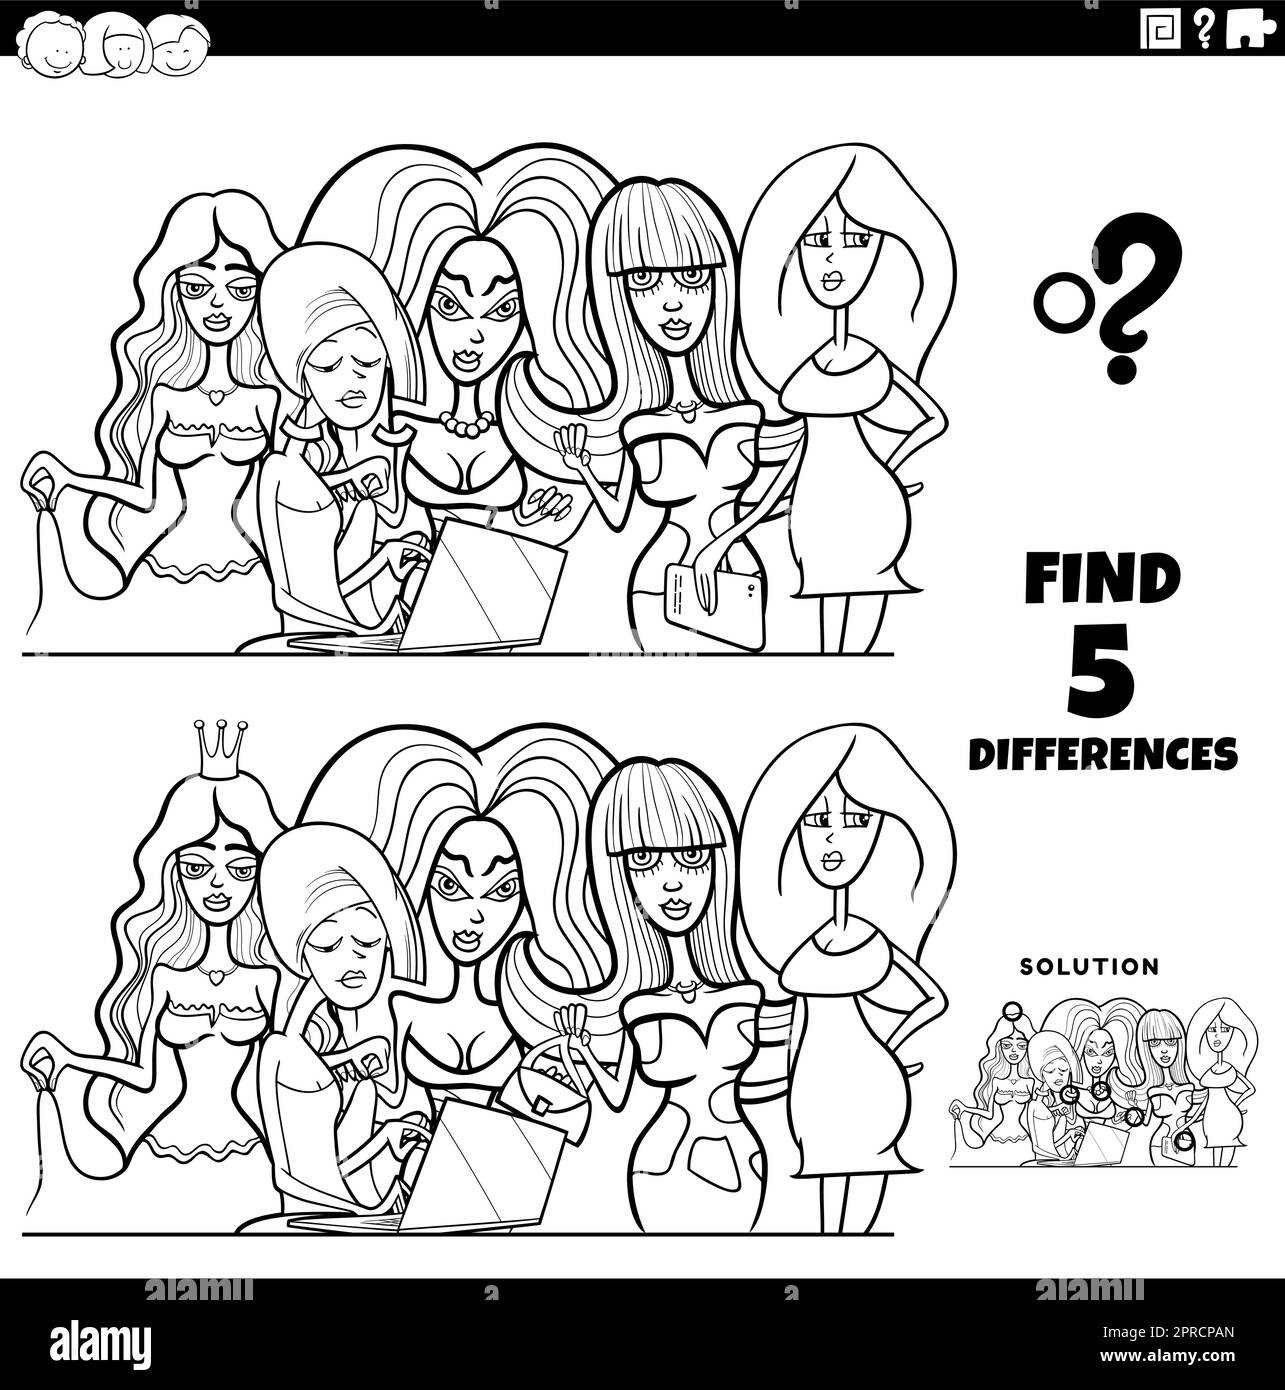 differences task with comic women coloring page Stock Vector Image ...